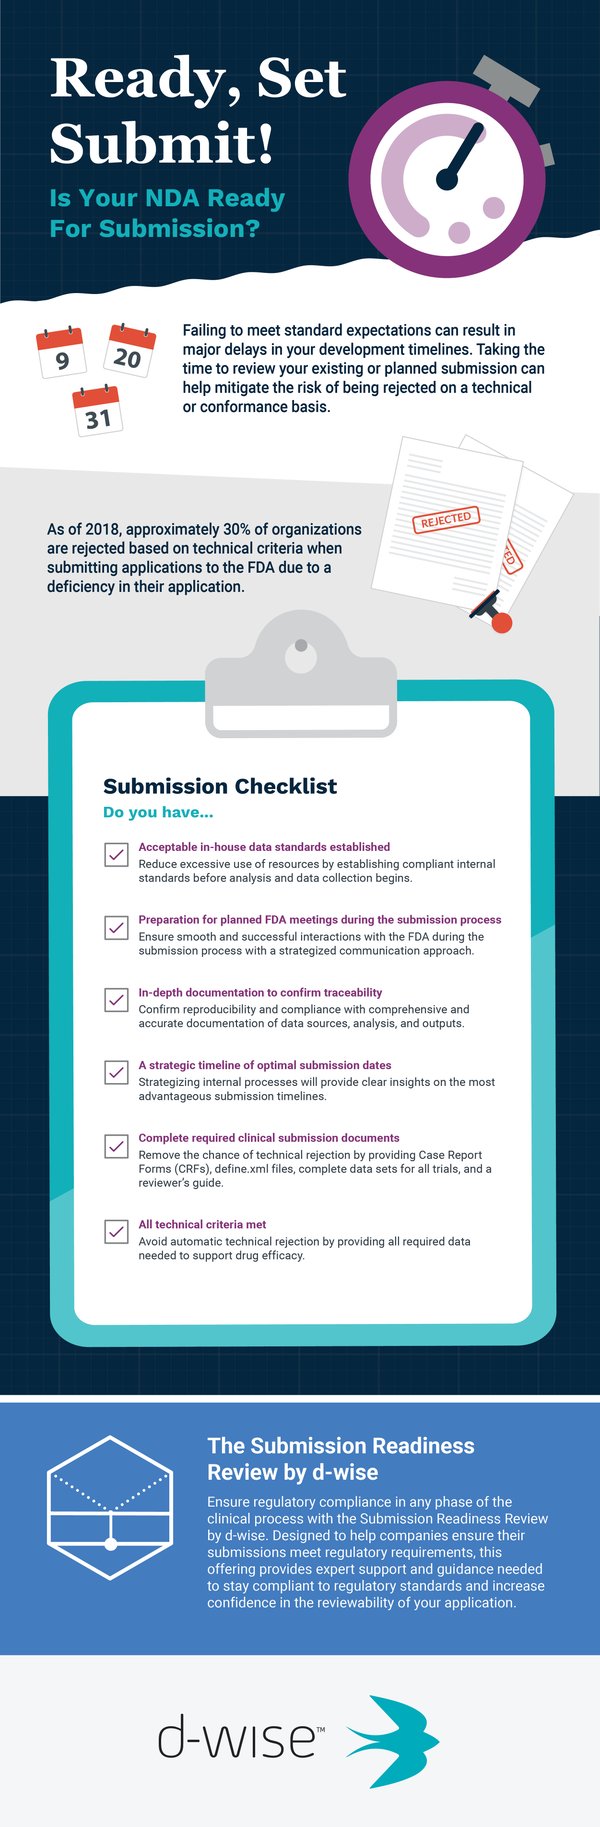 DWIS_Ready-Set-Submit_Infographic_v1 (1)